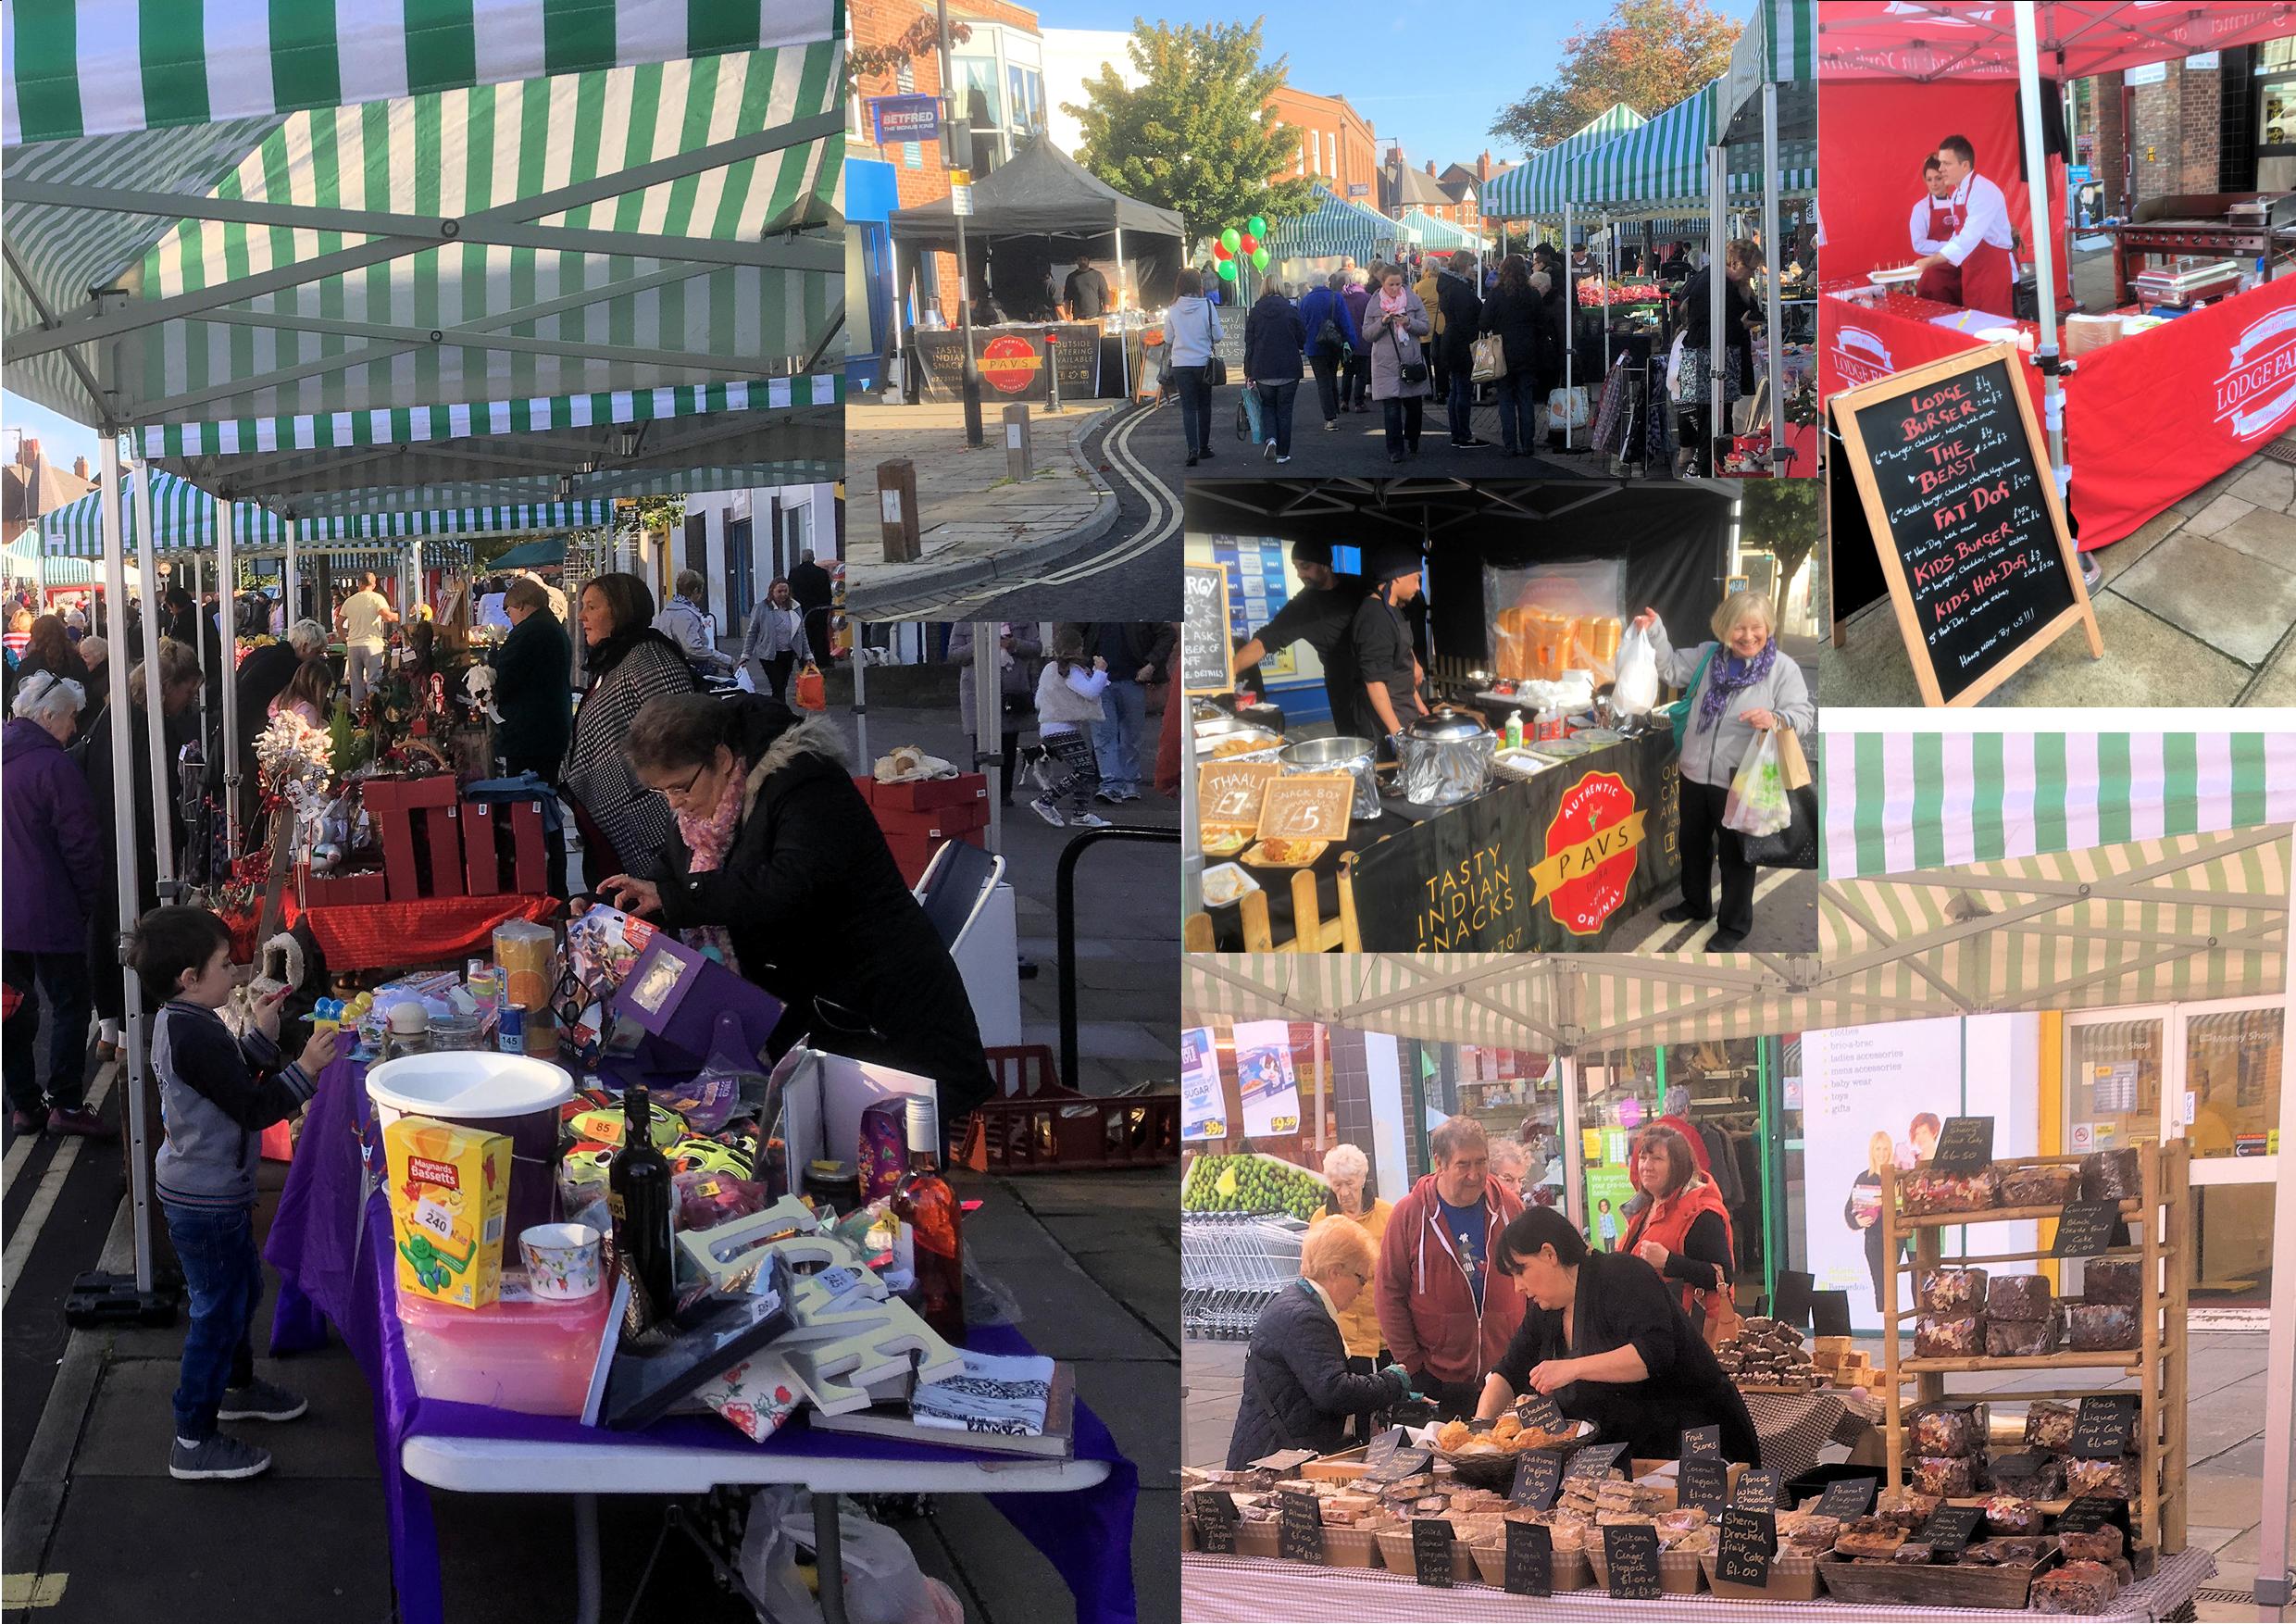 The week ended with another successful street market in Acomb. Popular stalls included Acomb Alive's tombola, Lodge Farms "fat dogs", Pav's indian sacks and a stall selling probably the best fruit cake in Yorkshire. The next market takes place on 26th Nov.